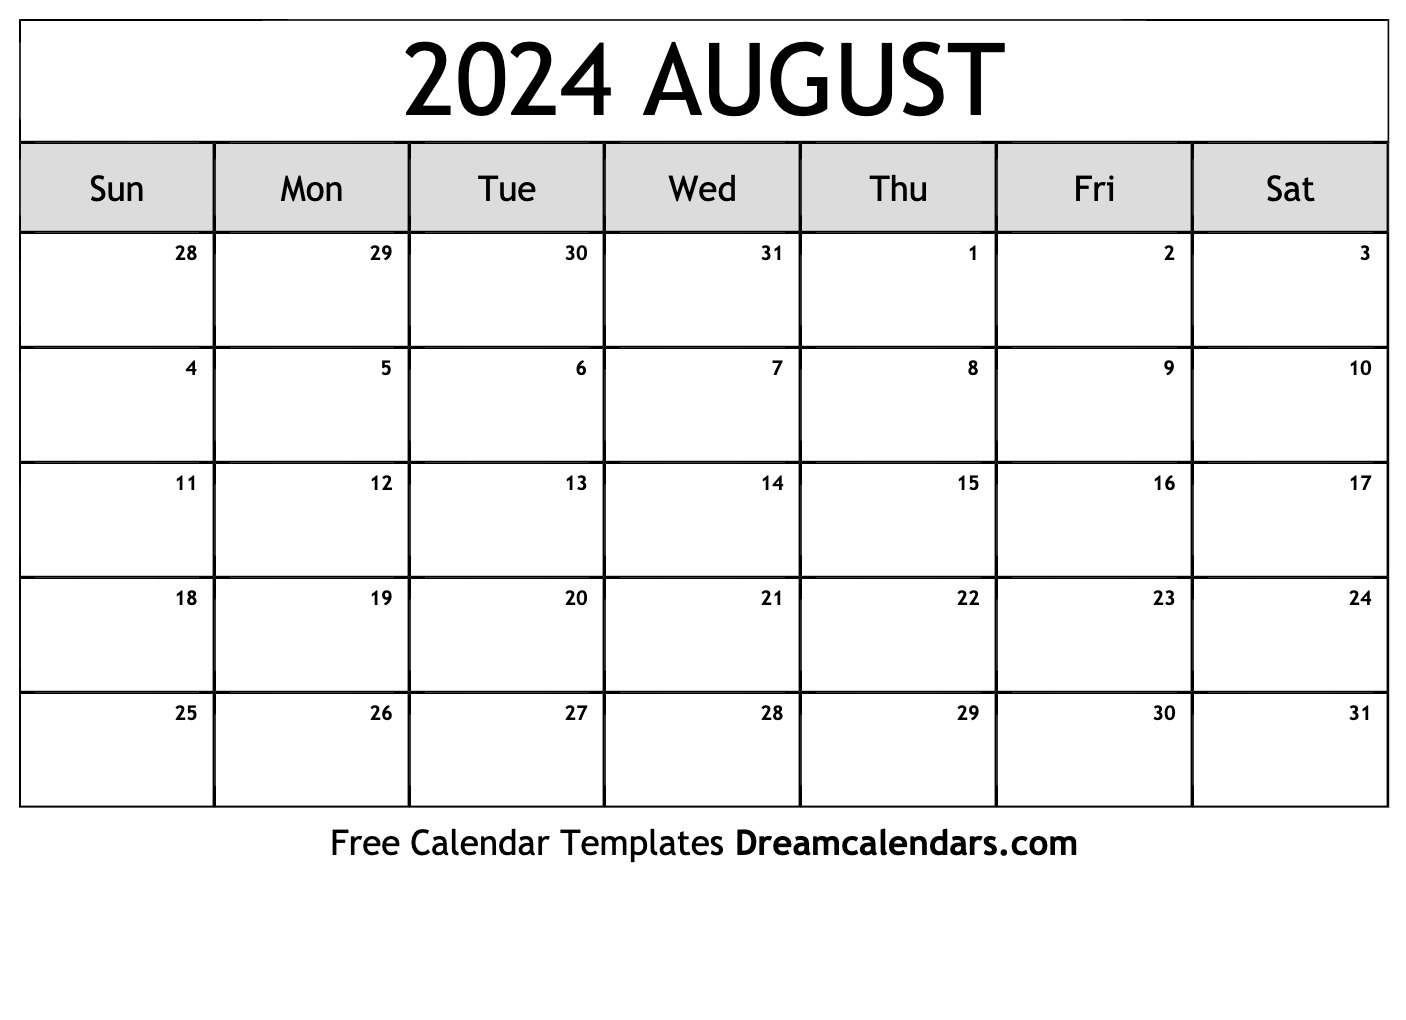 August 2024 Calendar | Free Blank Printable With Holidays for Calendar August 2024 Printable Free